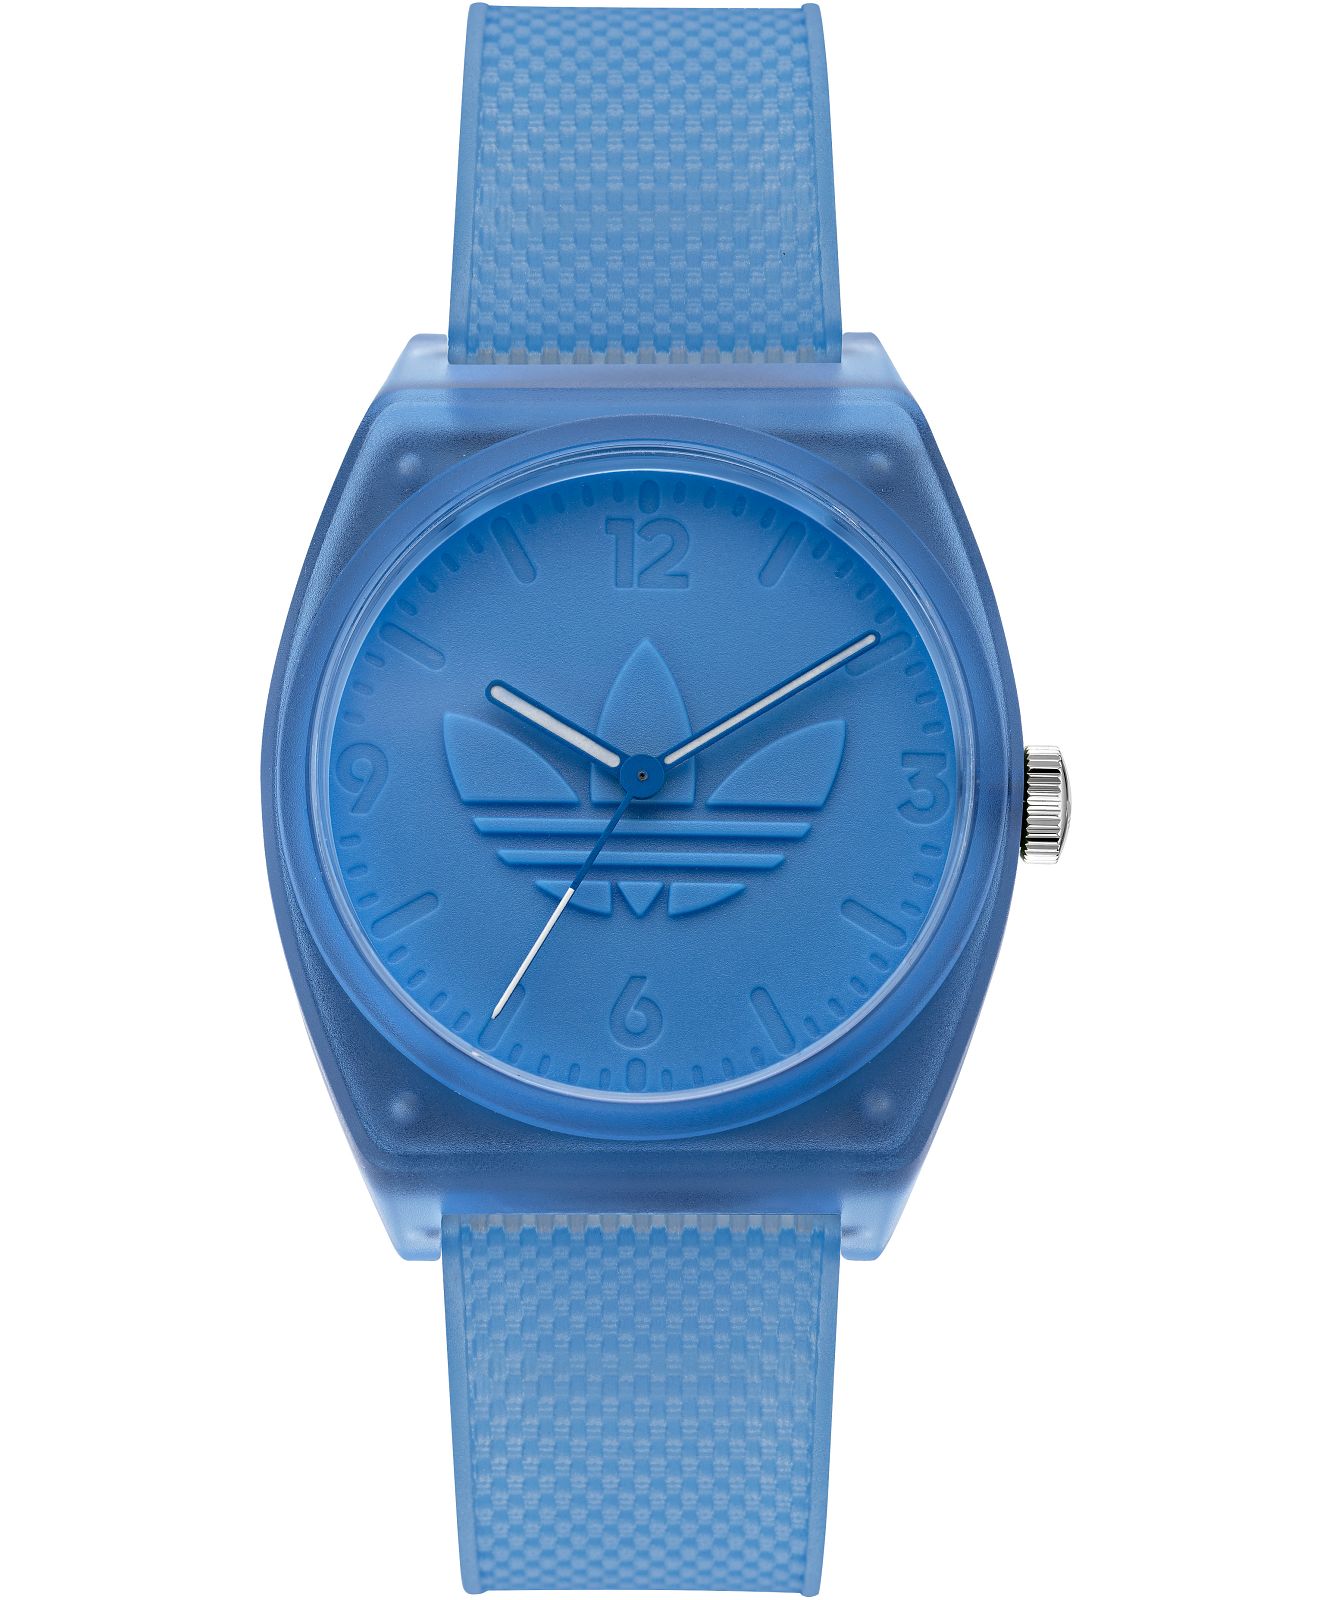 Street - Project Two Watch AOST22031 • Adidas Originals